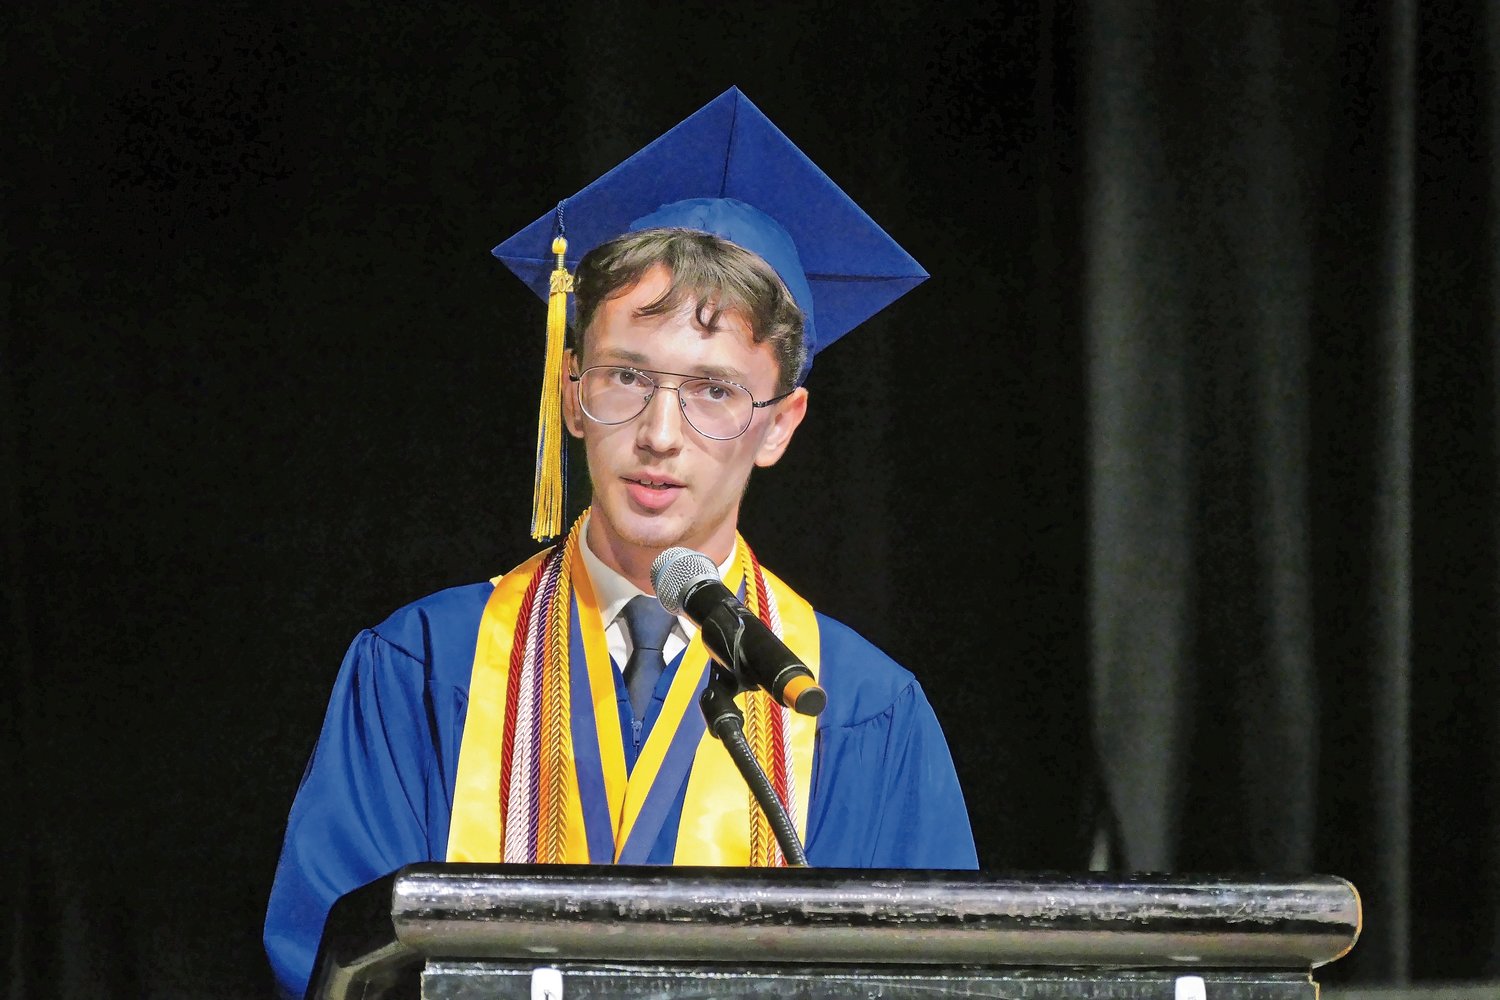 Lawrence salutatorian Ilia Urgen Urgen offered reflections and advice to the class of 2022.